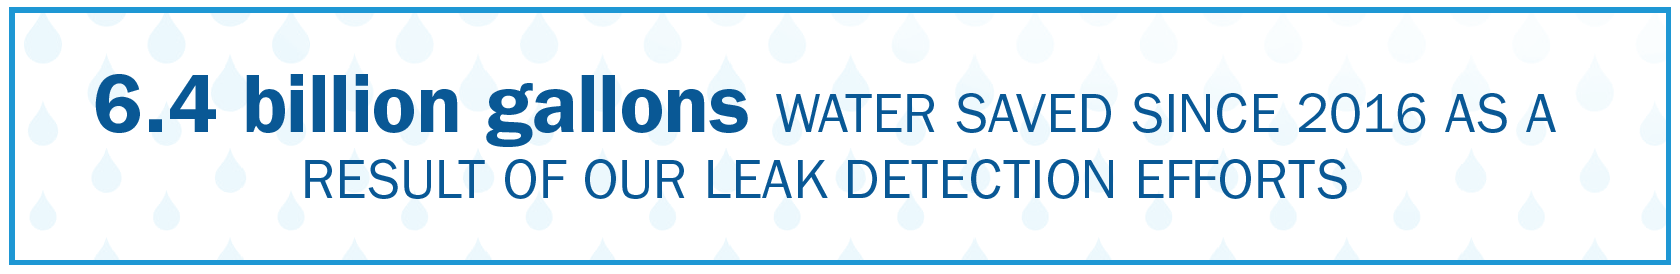 New Jersey American Water Leak detection fact